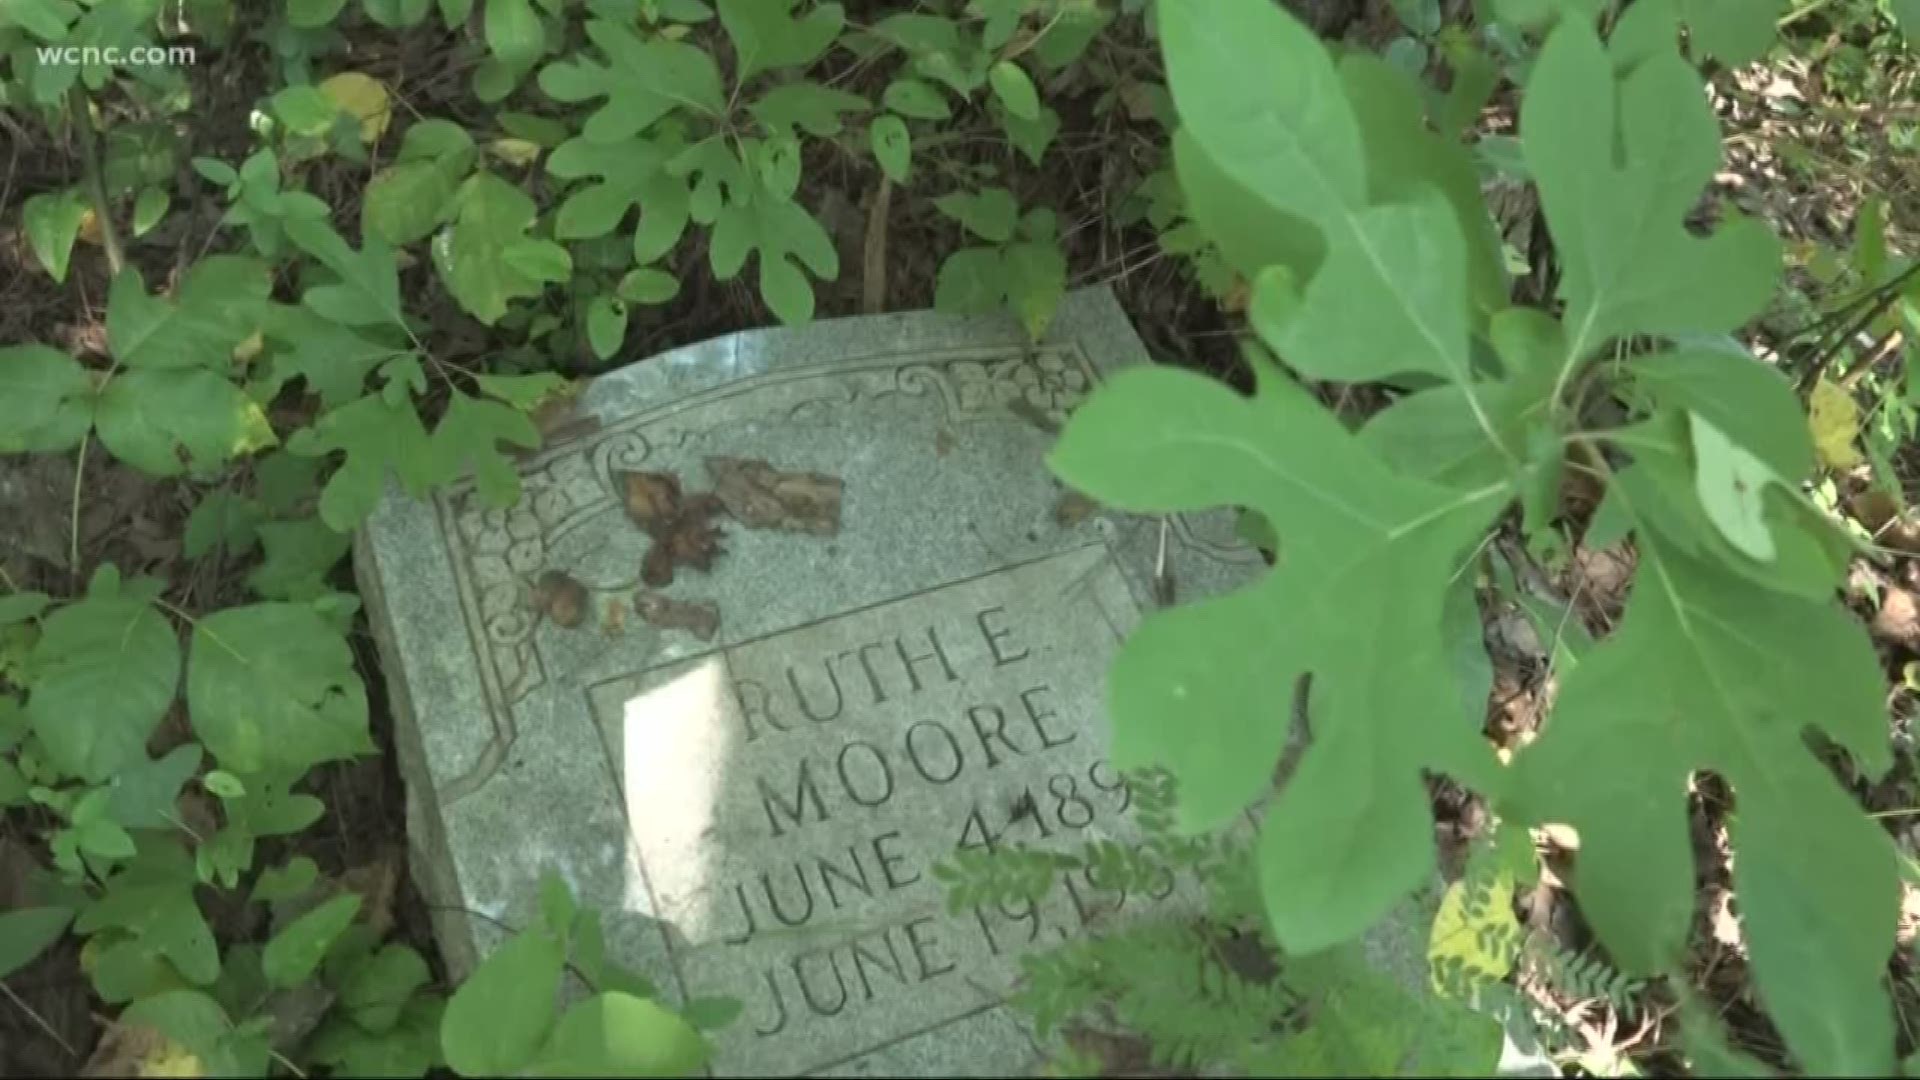 400 years after the first slaves were held captive in the US, many African-American cemeteries remain abandoned. On Labor Day, people in a west Charlotte neighborhood say they won't stop working to bring dignity back to one of those cemeteries.